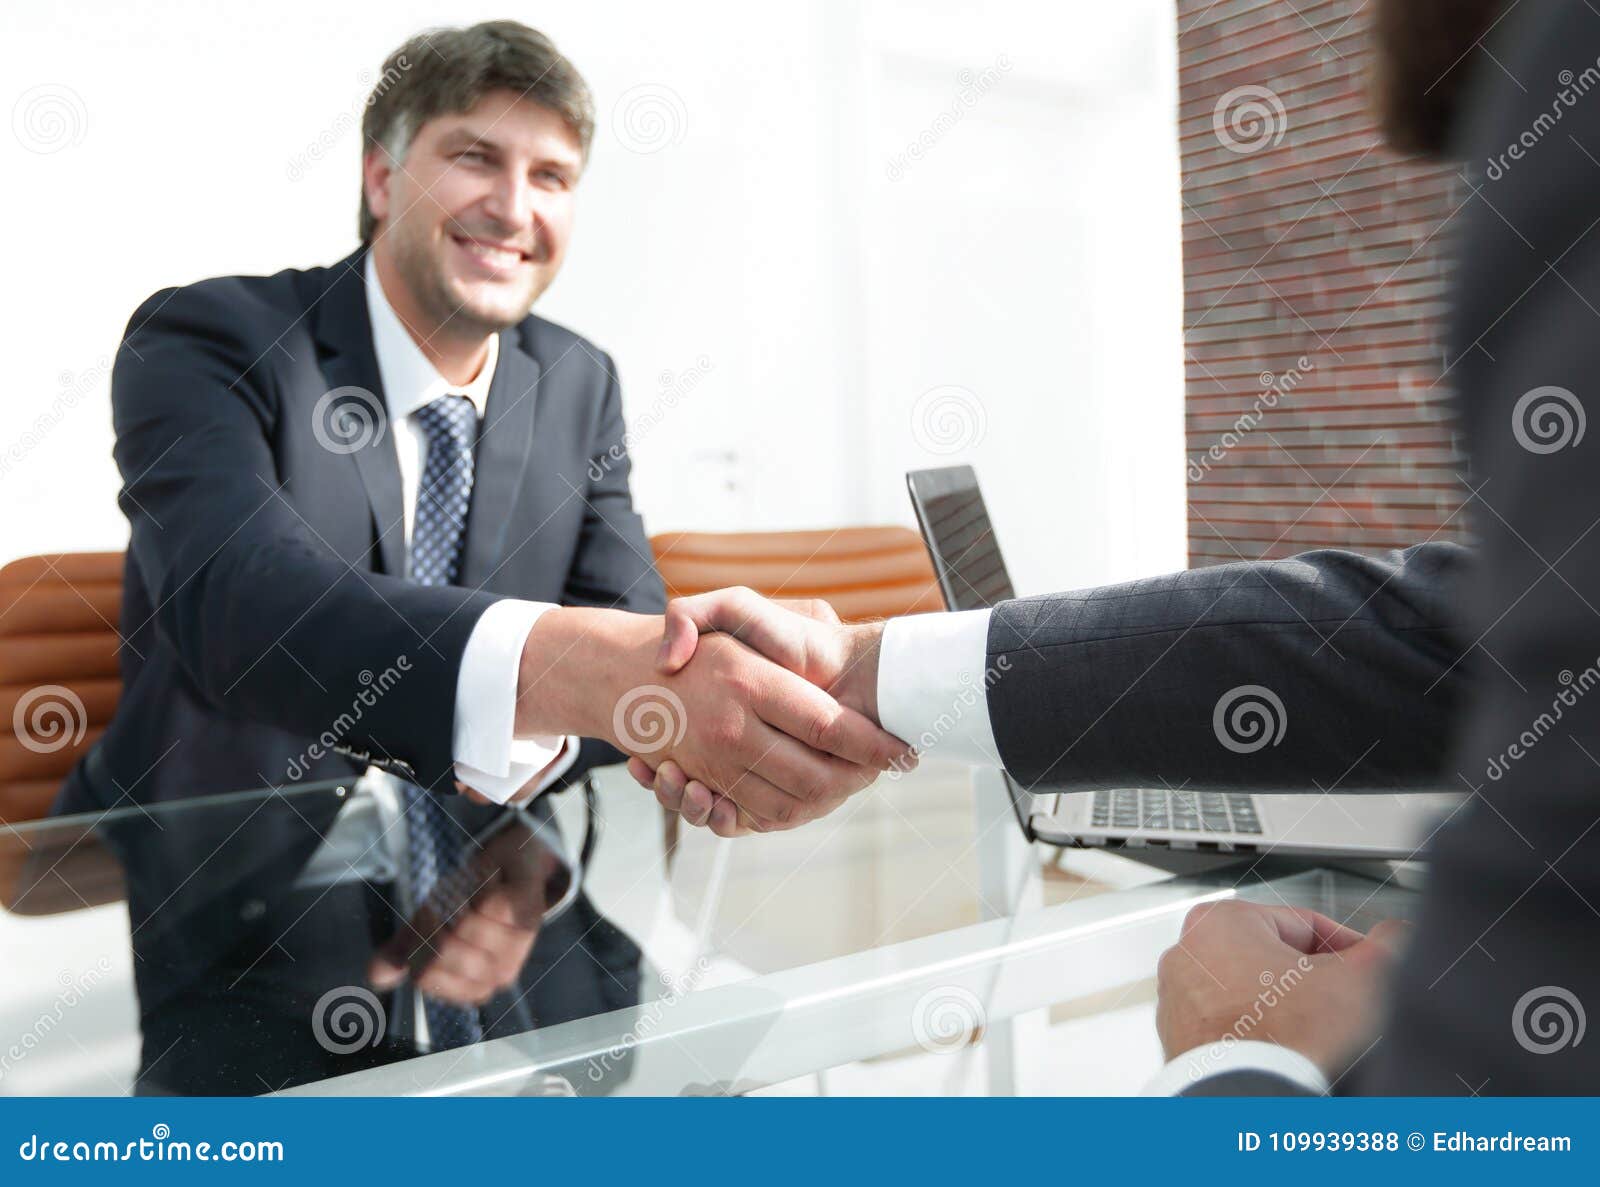 Businessman Stretches Out His Hand For A Handshake Stock